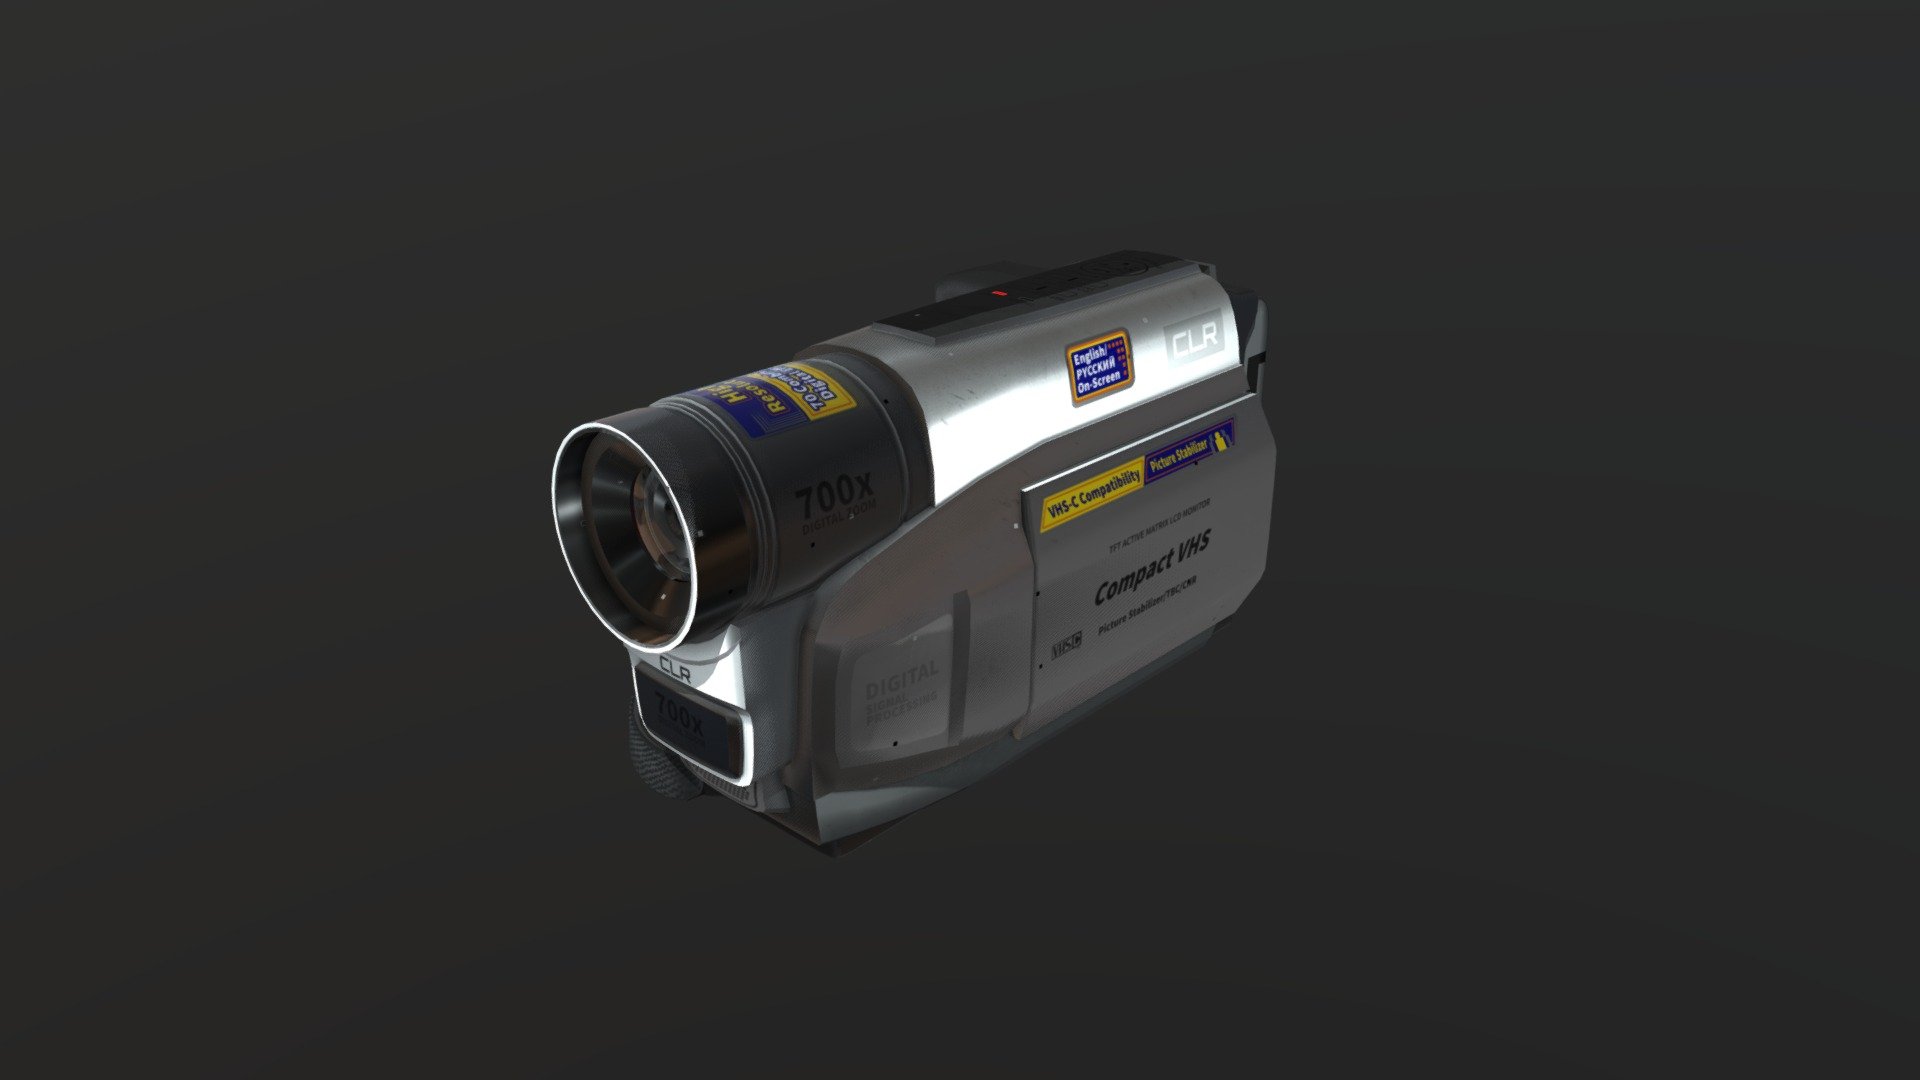 This model is an almost exact replication of a JVC compact VHS camcorder I had lying around. I changed the company name for obvious reasons.

I wanted to practice 3d modelling and texturing from a real reference object, so I chose this camcorder because of the round-ish shapes and the 80s vibes.
It's a little out of my generation, but I love the look and feel of VHS anything, really, so this was a perfect reference object 3d model